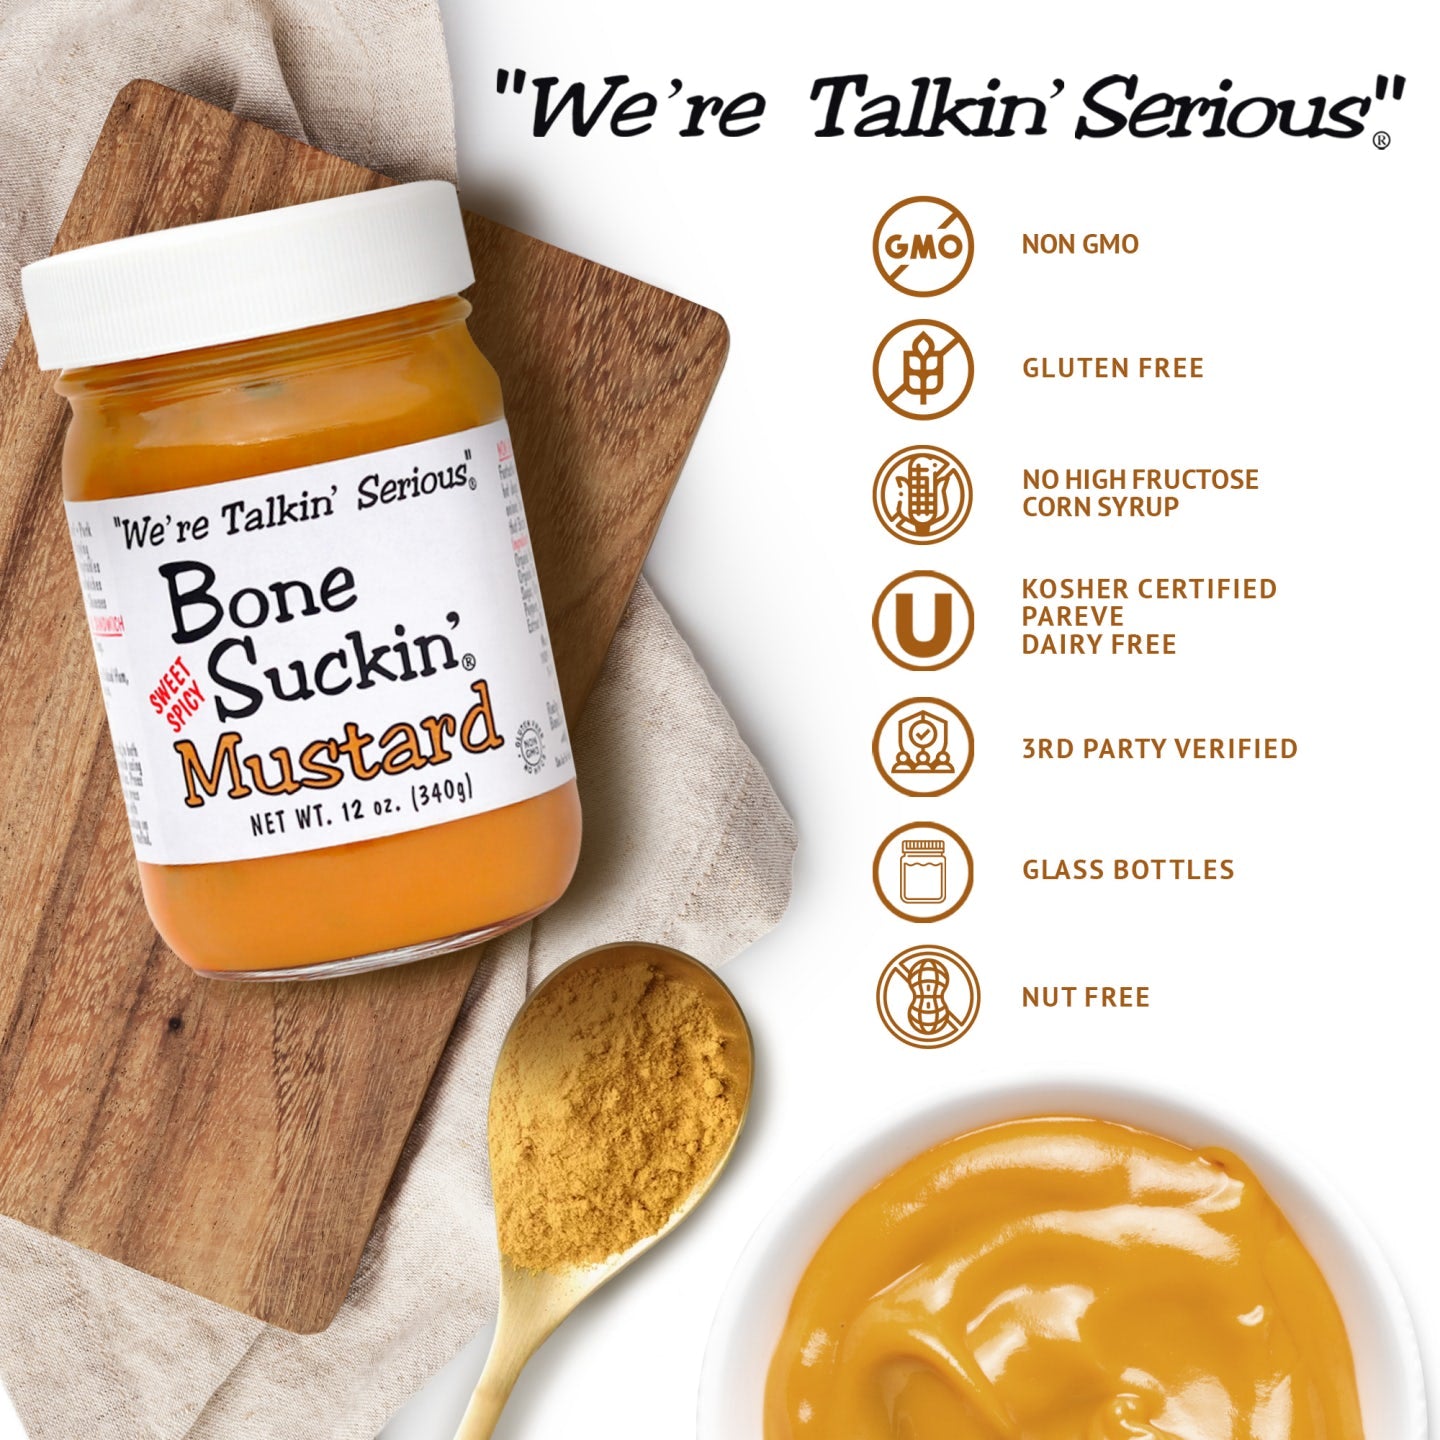 Bone Suckin' Sweet Spicy Mustard-Additional Information: 12 oz. Jar, NON GMO, GLUTEN FREE, No High Fructose Corn Syrup, KOSHER, PAREVE, Dairy Free, 3rd Party Verified, glass bottles and nut free.